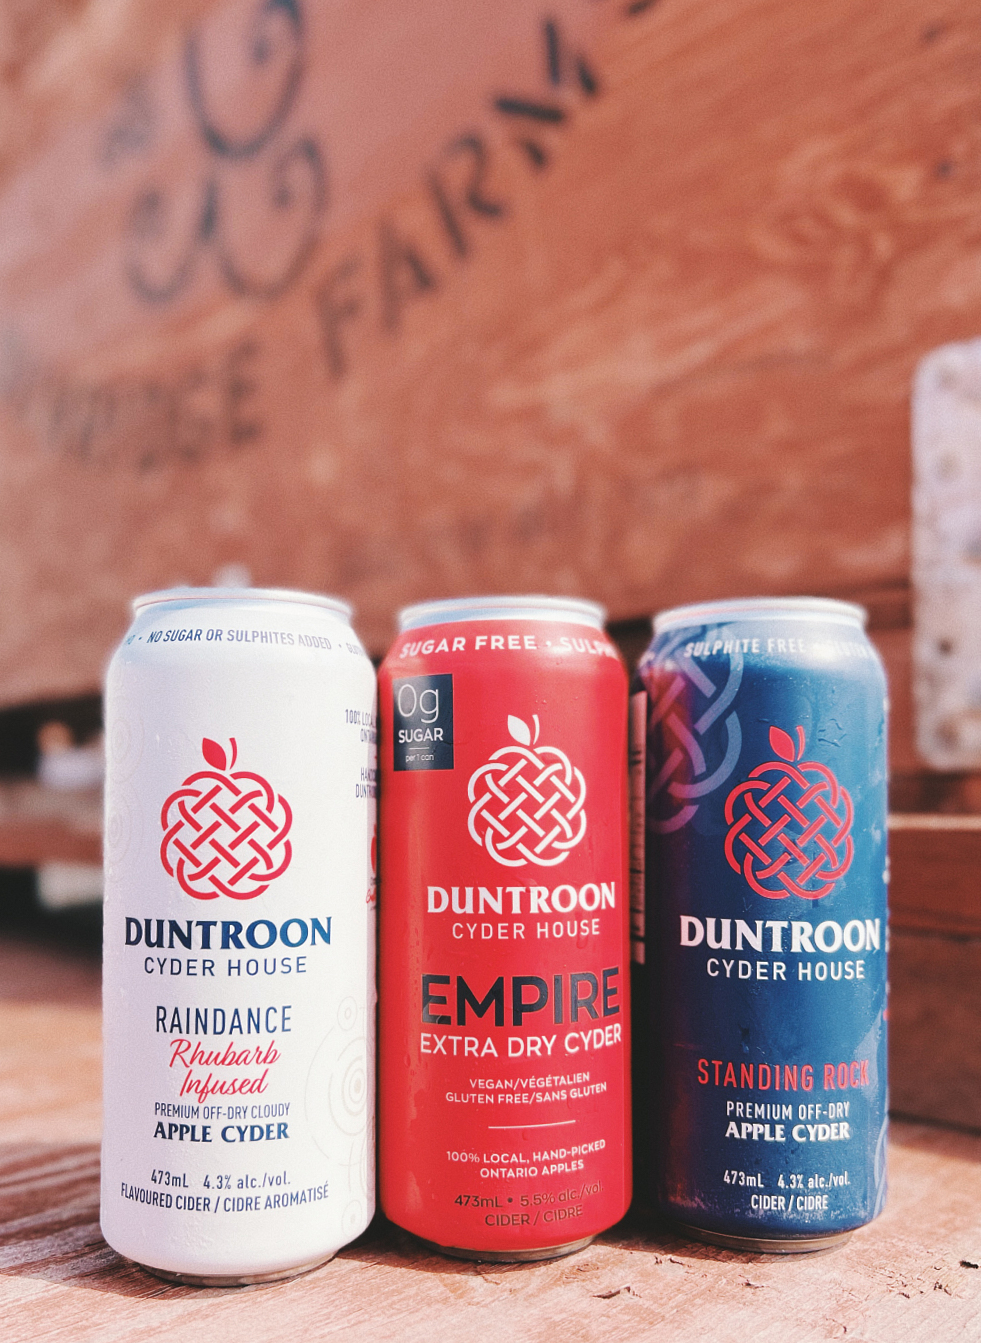 White, red and blue cans of Duntroon cider